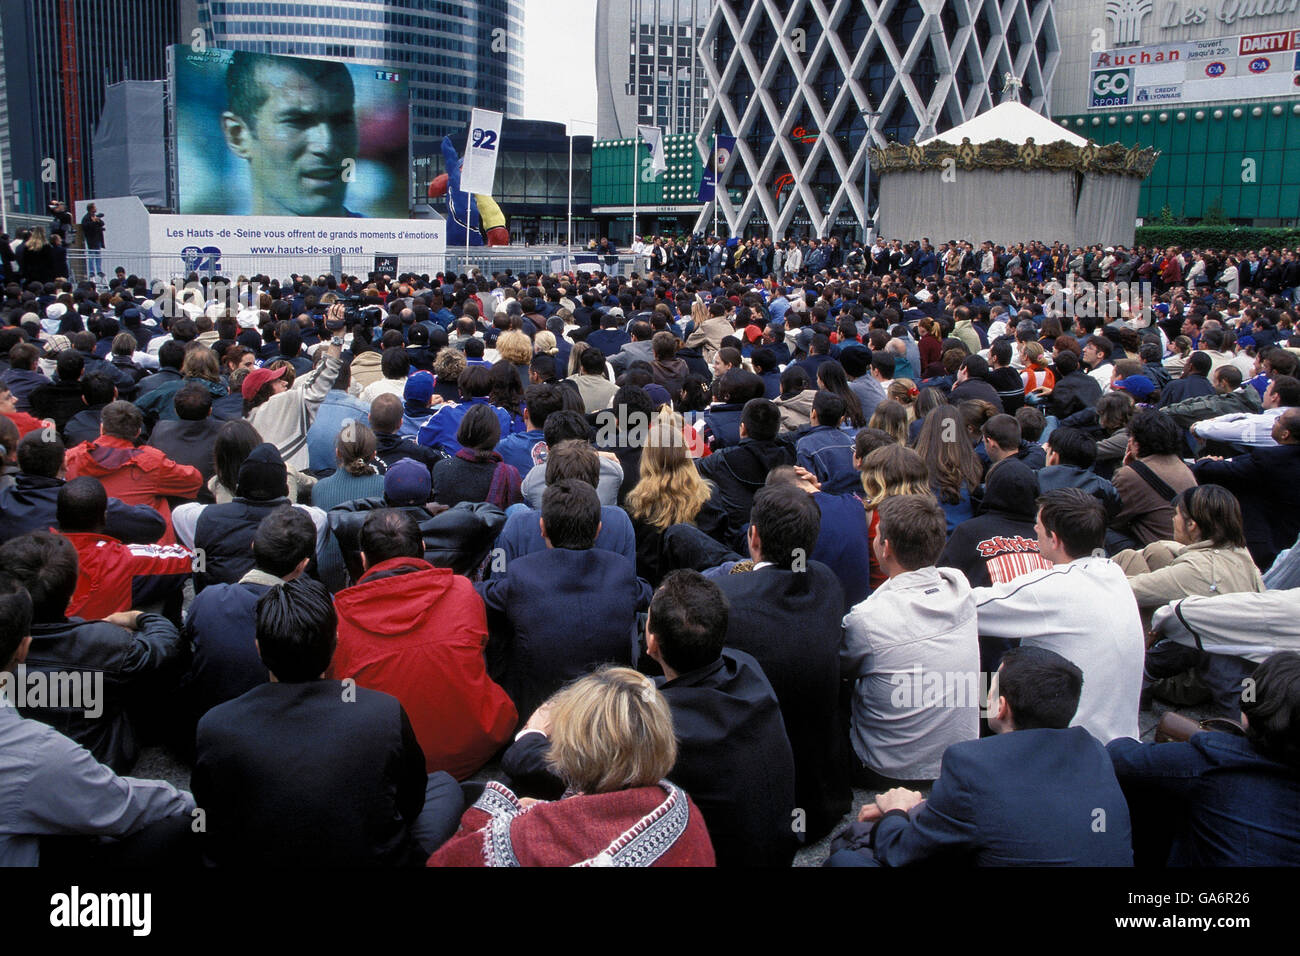 The face of star French soccer star Zinedine Zidane appears on a giant screen during a public World Cup viewing at La Defense, France, June 2002. Stock Photo